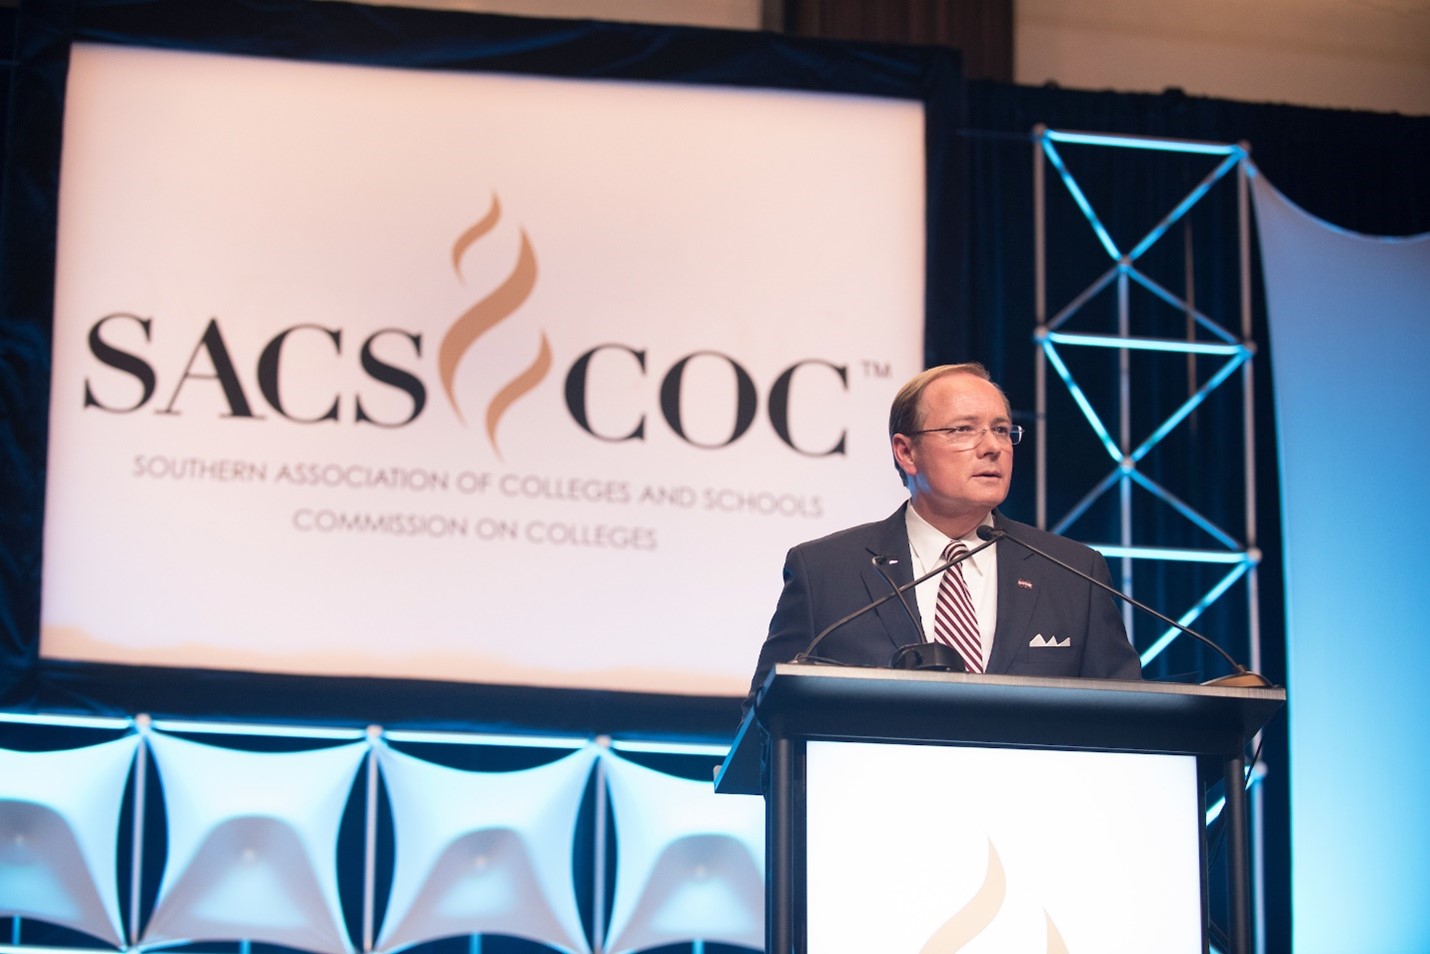 MSU president Dr. Mark Keenum speaks at the general session of the SACSCOC regional accrediting organization